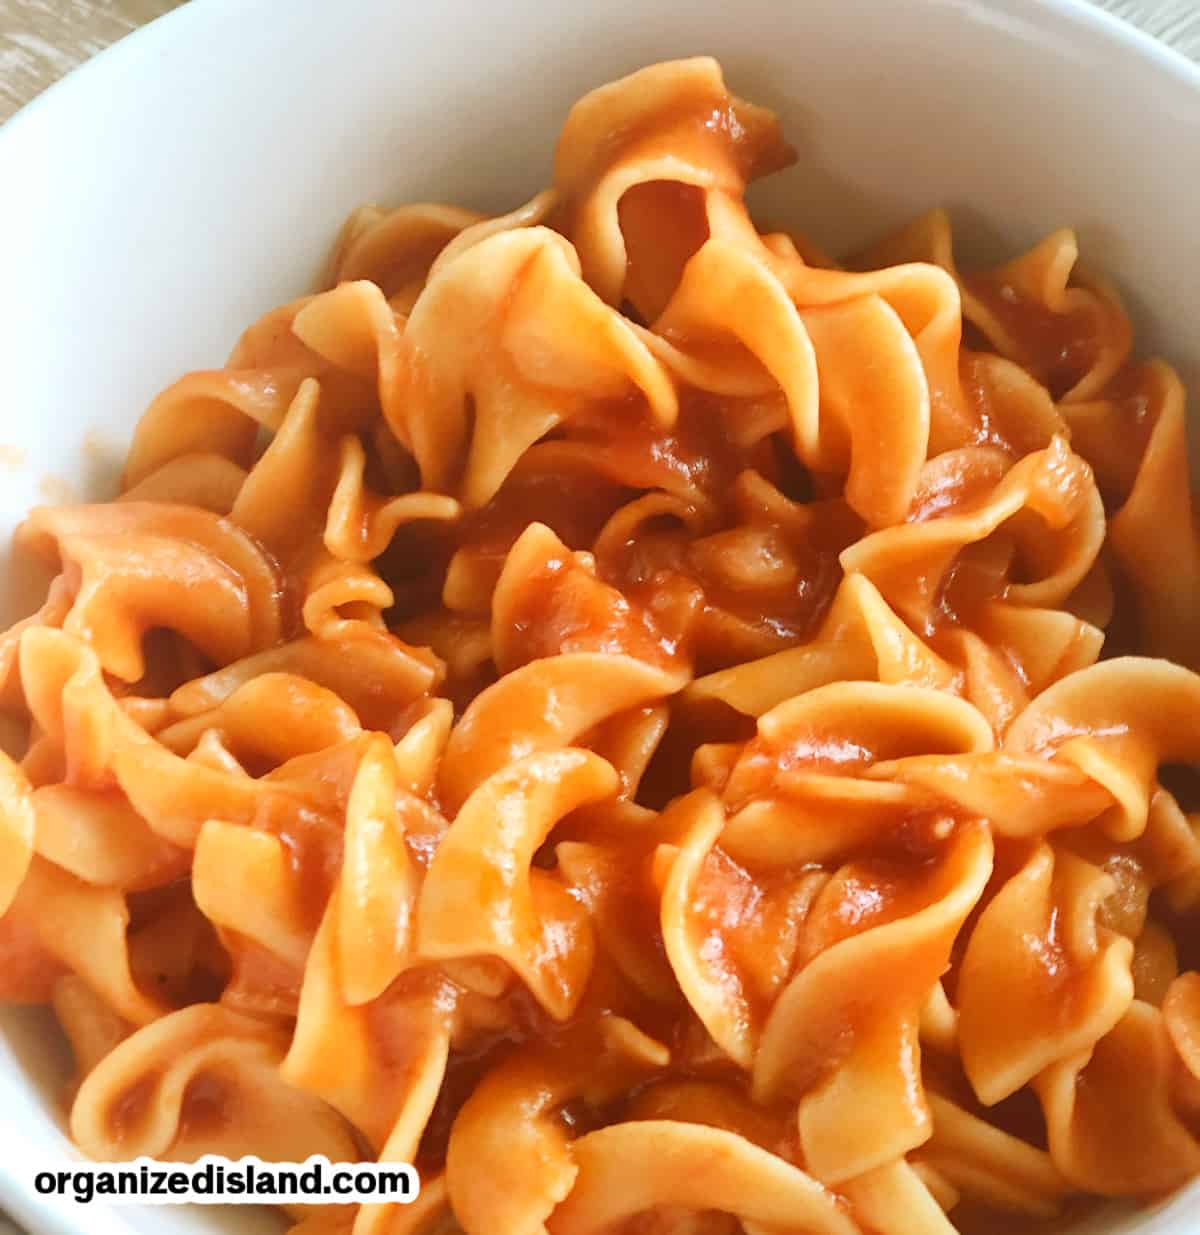 Pasta with tomato sauce in bowl.